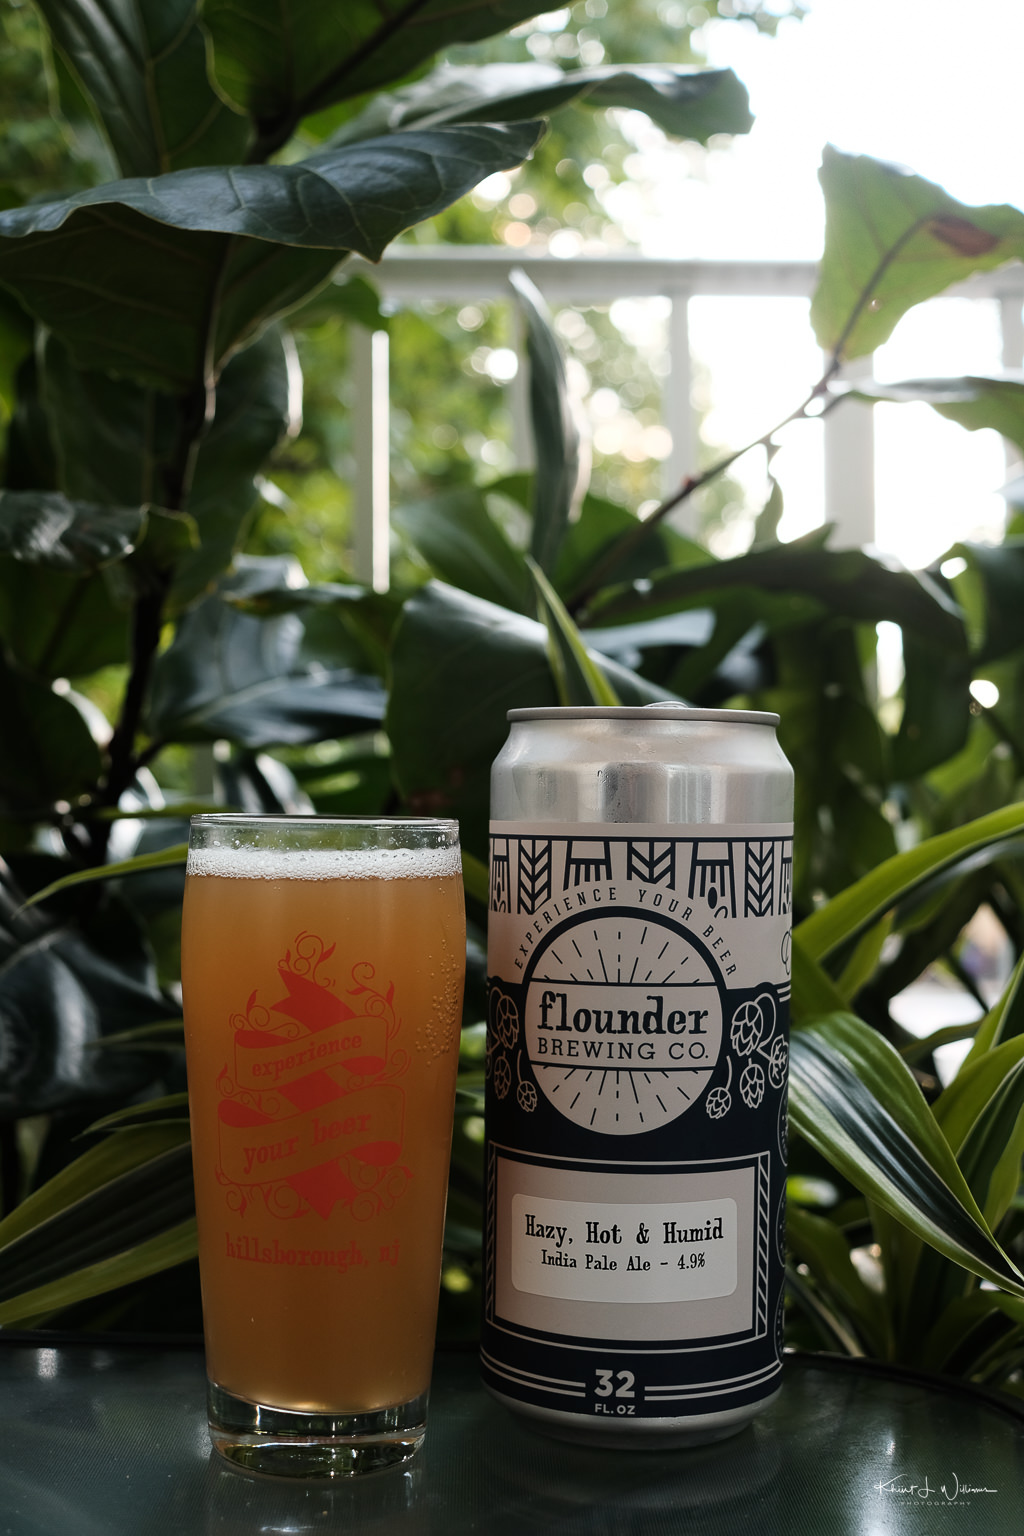 Hazy, Hot, & Humid by Flounder Brewing Co.